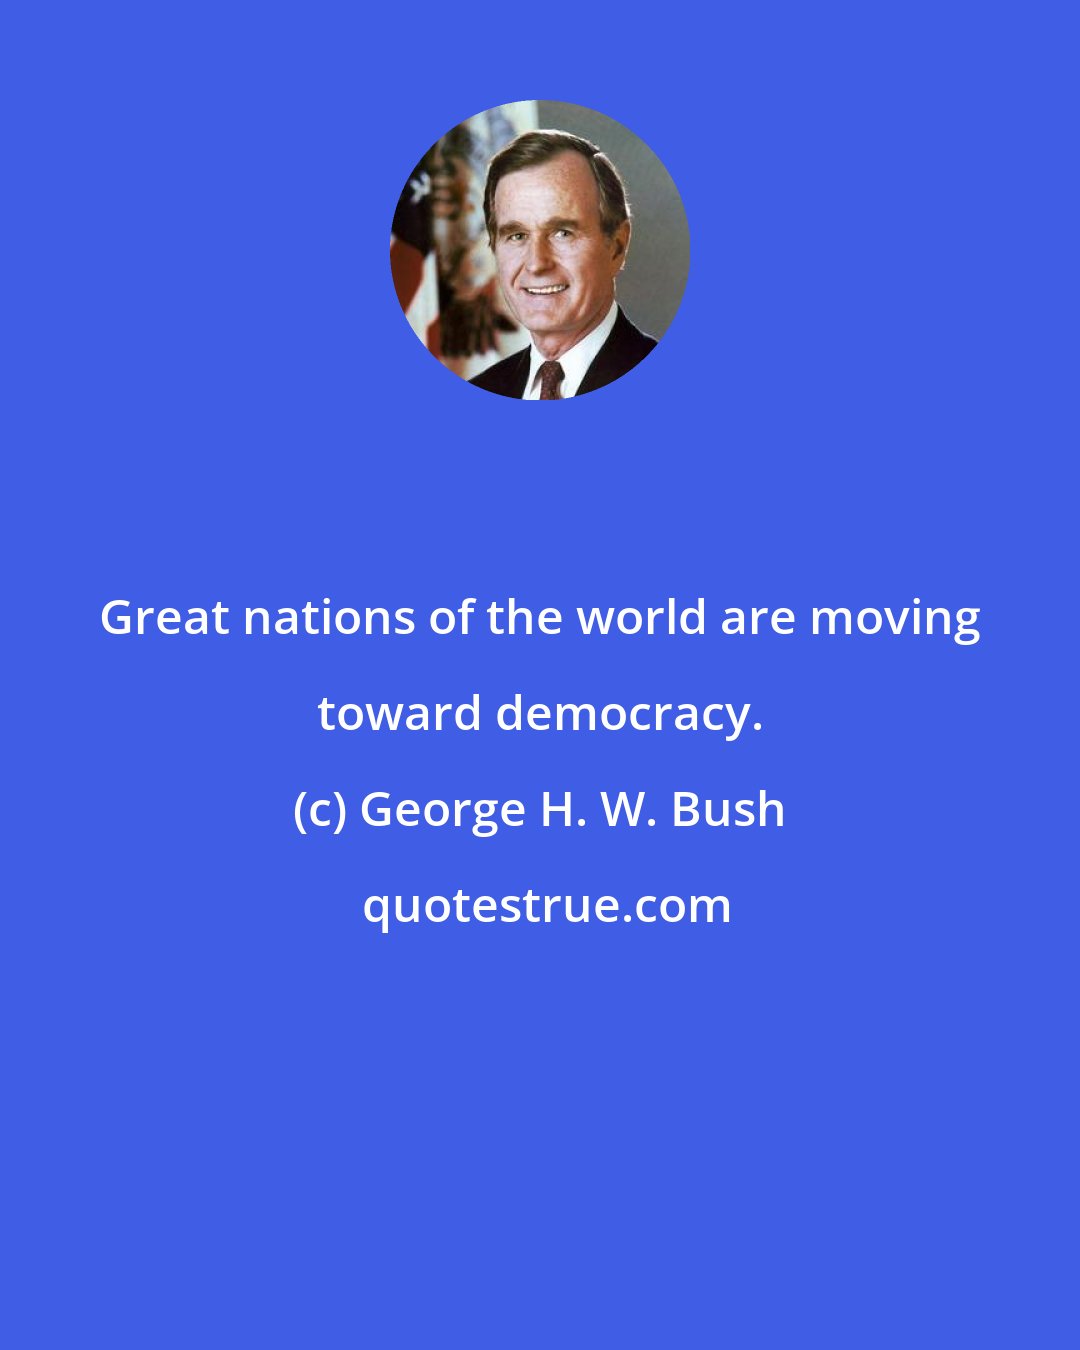 George H. W. Bush: Great nations of the world are moving toward democracy.